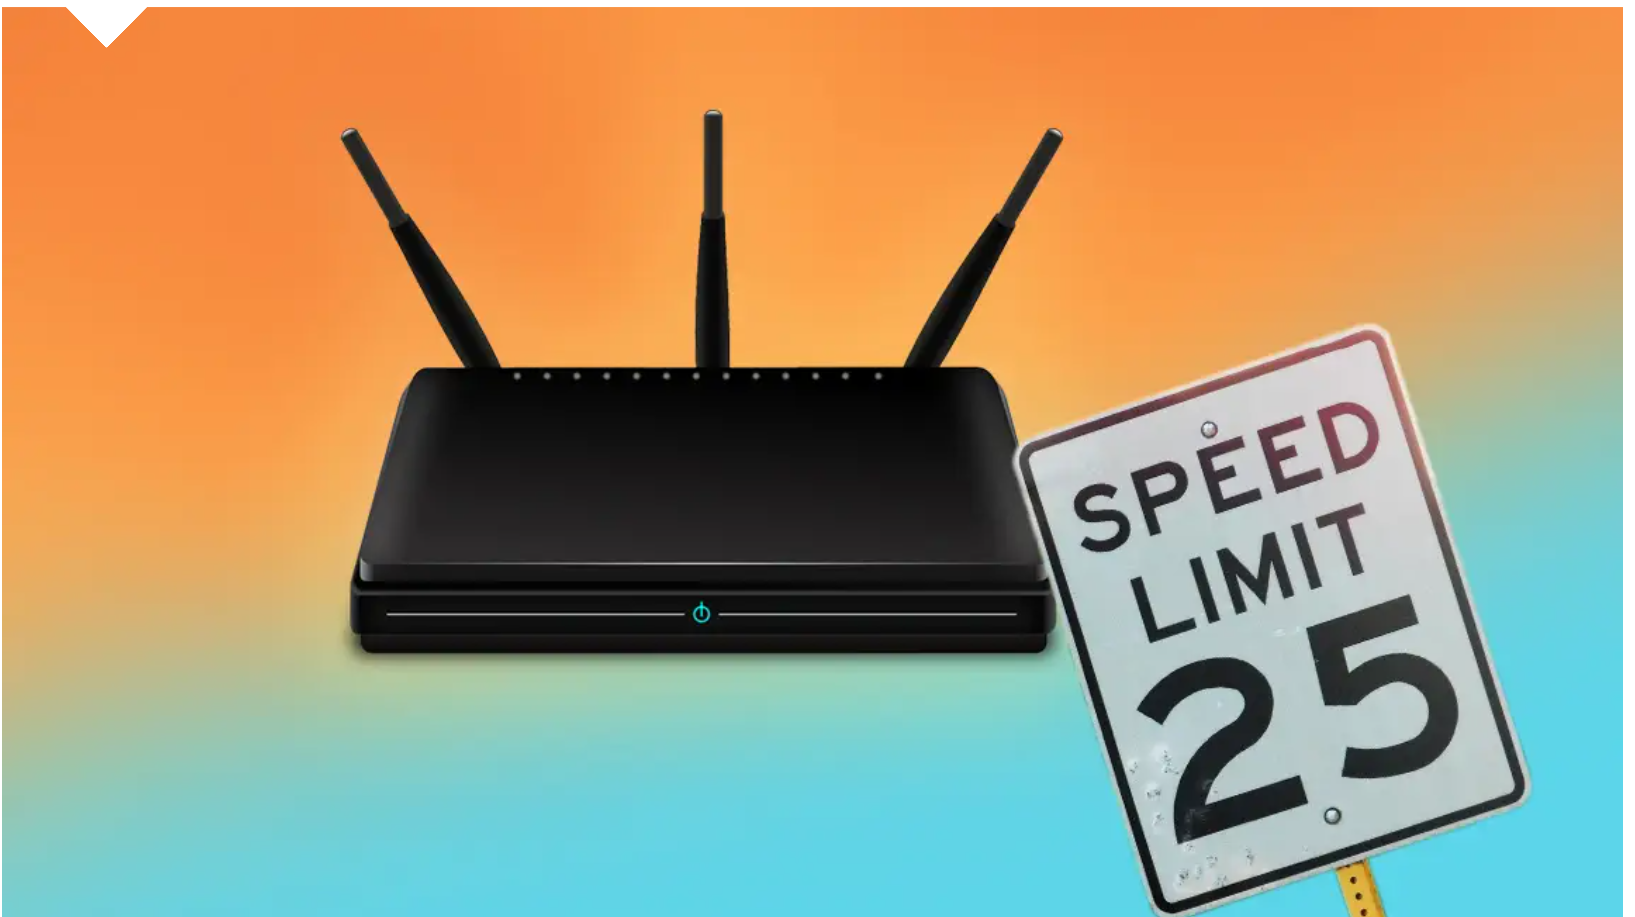 Spectrum Router Login - How to Login charter Spectrum Router